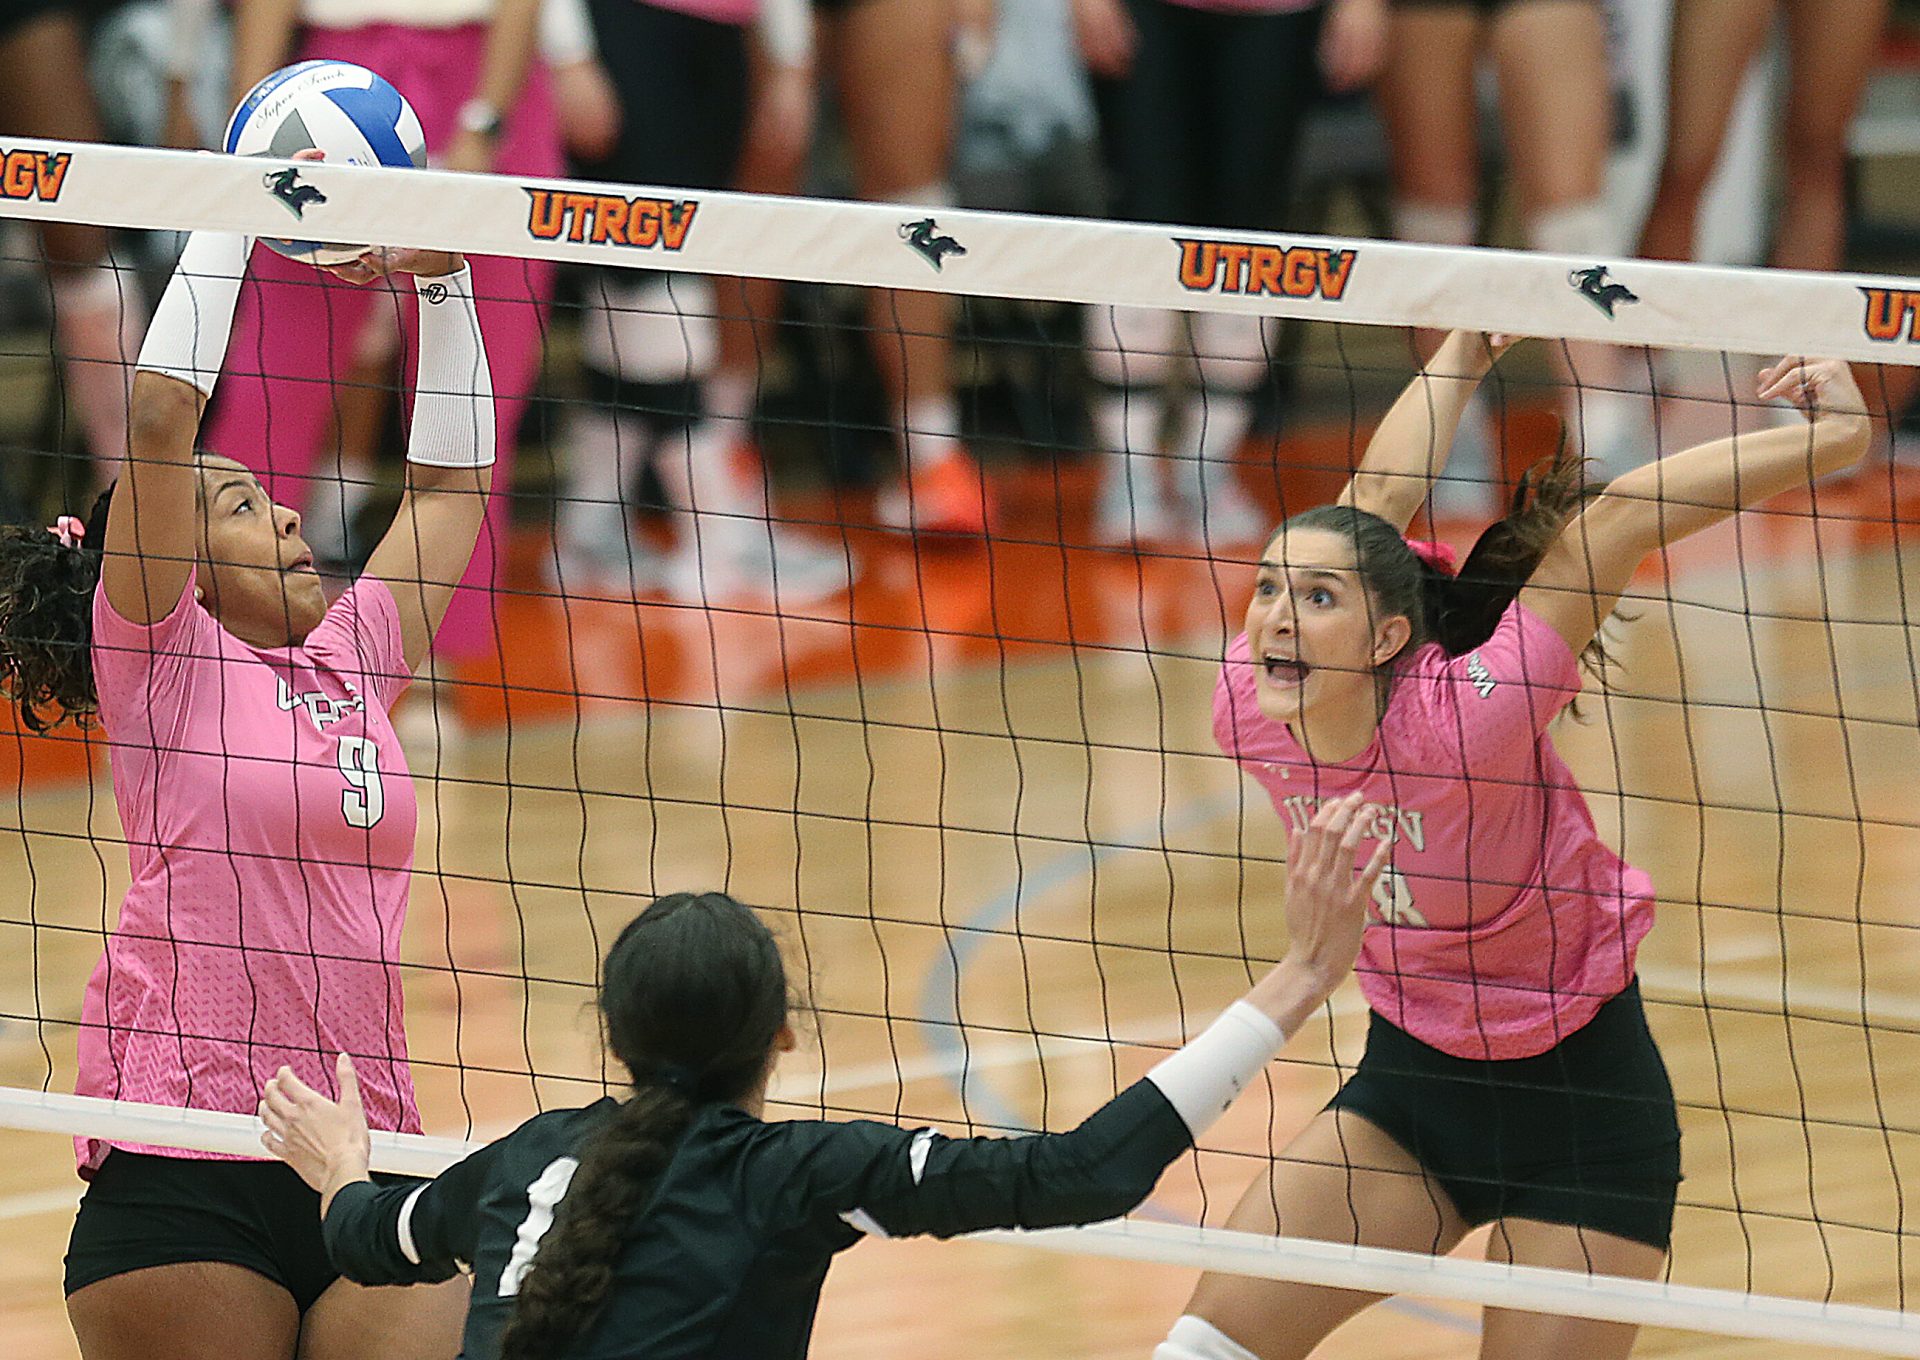 UTRGV swept after two-set lead against Grand Canyon